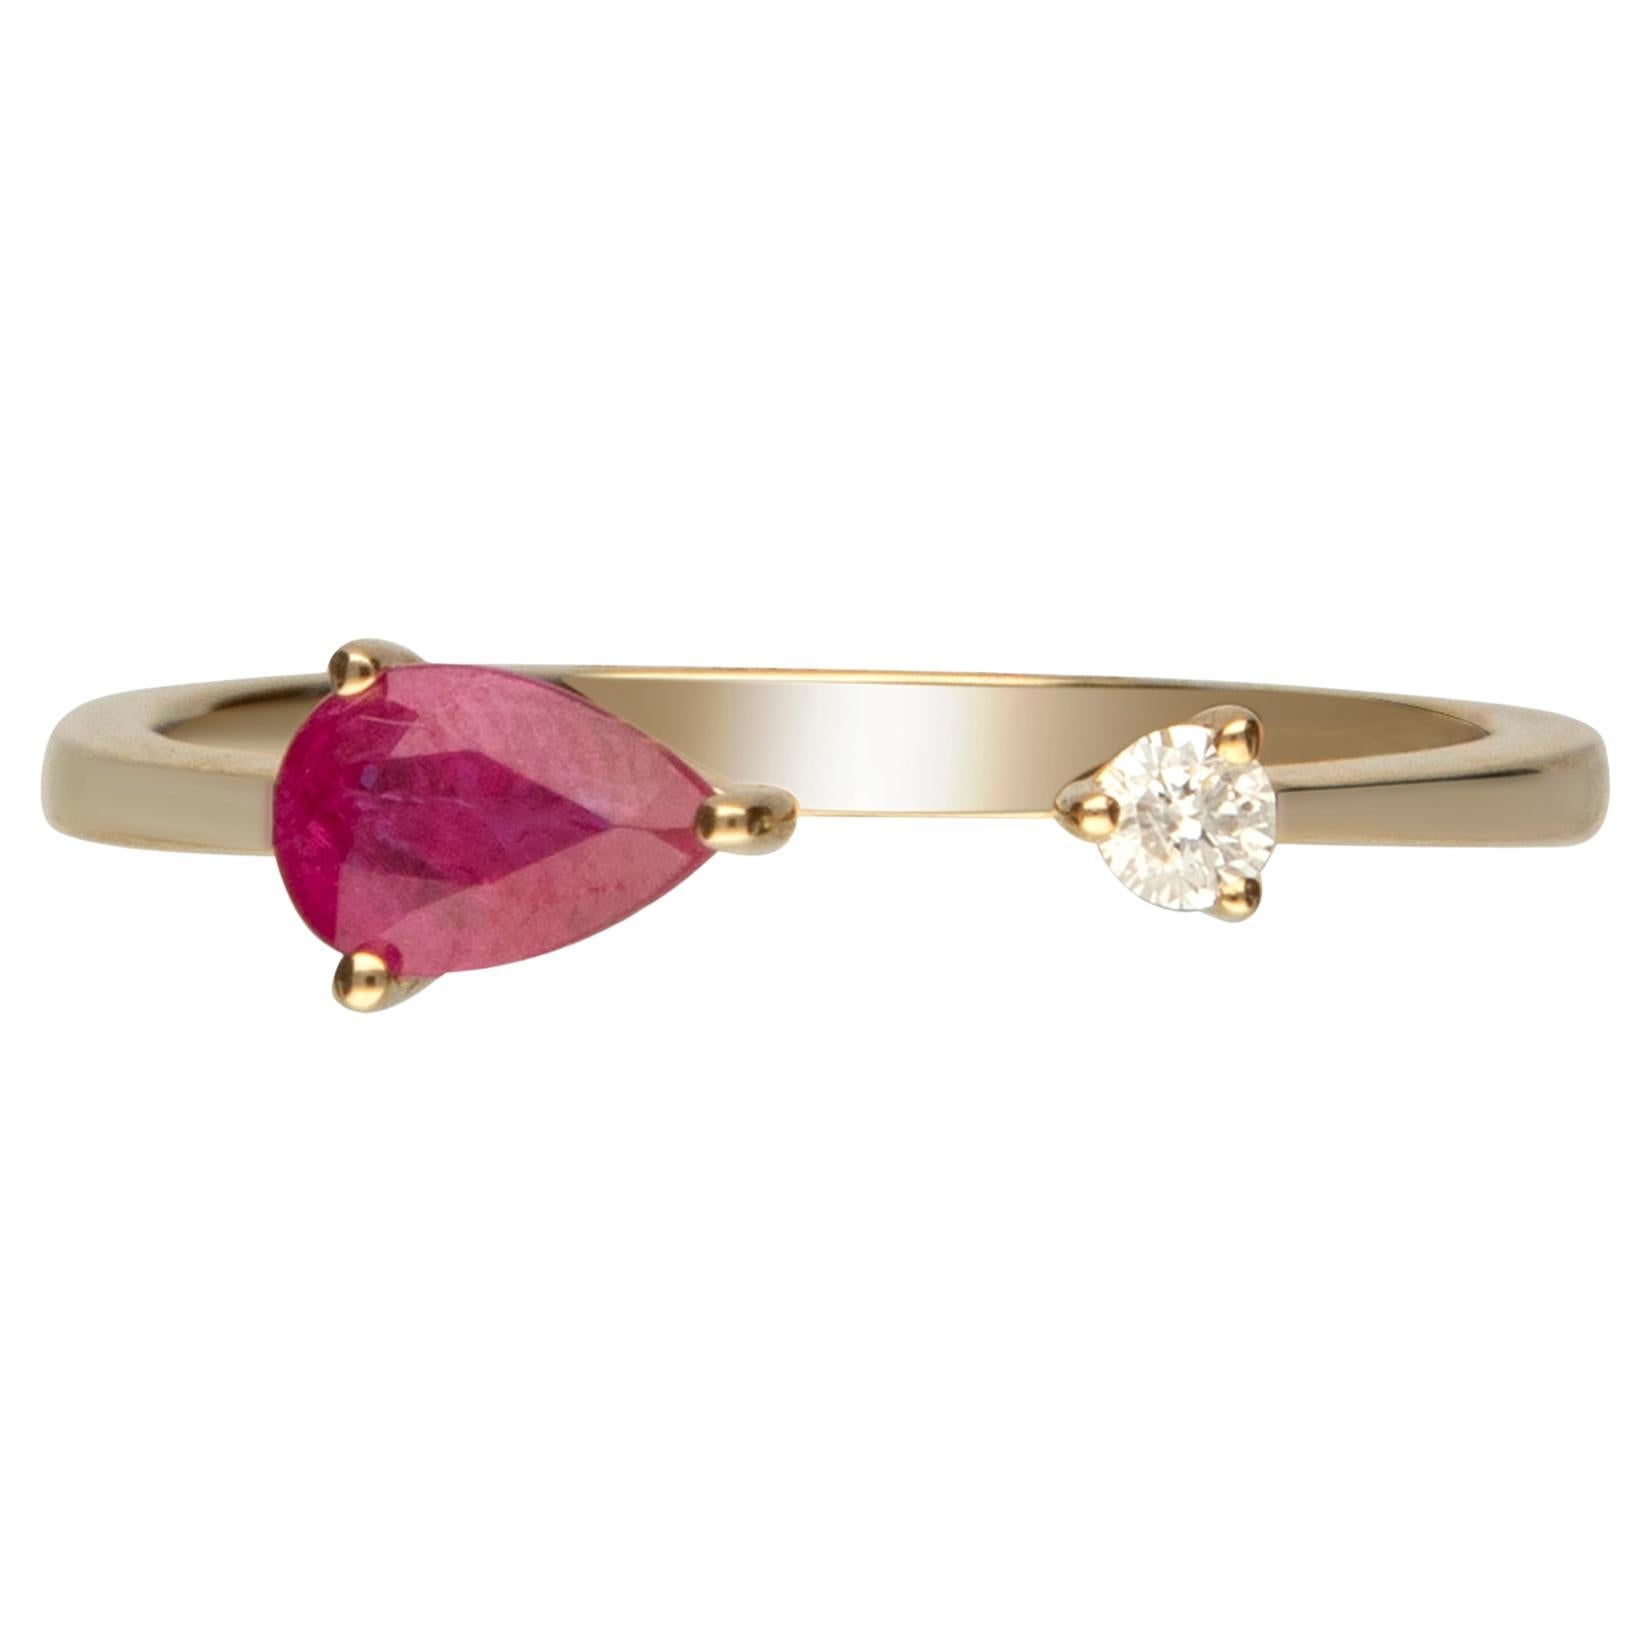 0.43 Carat Pear-Cut Ruby with Diamond Accents 14K Yellow Gold Ring